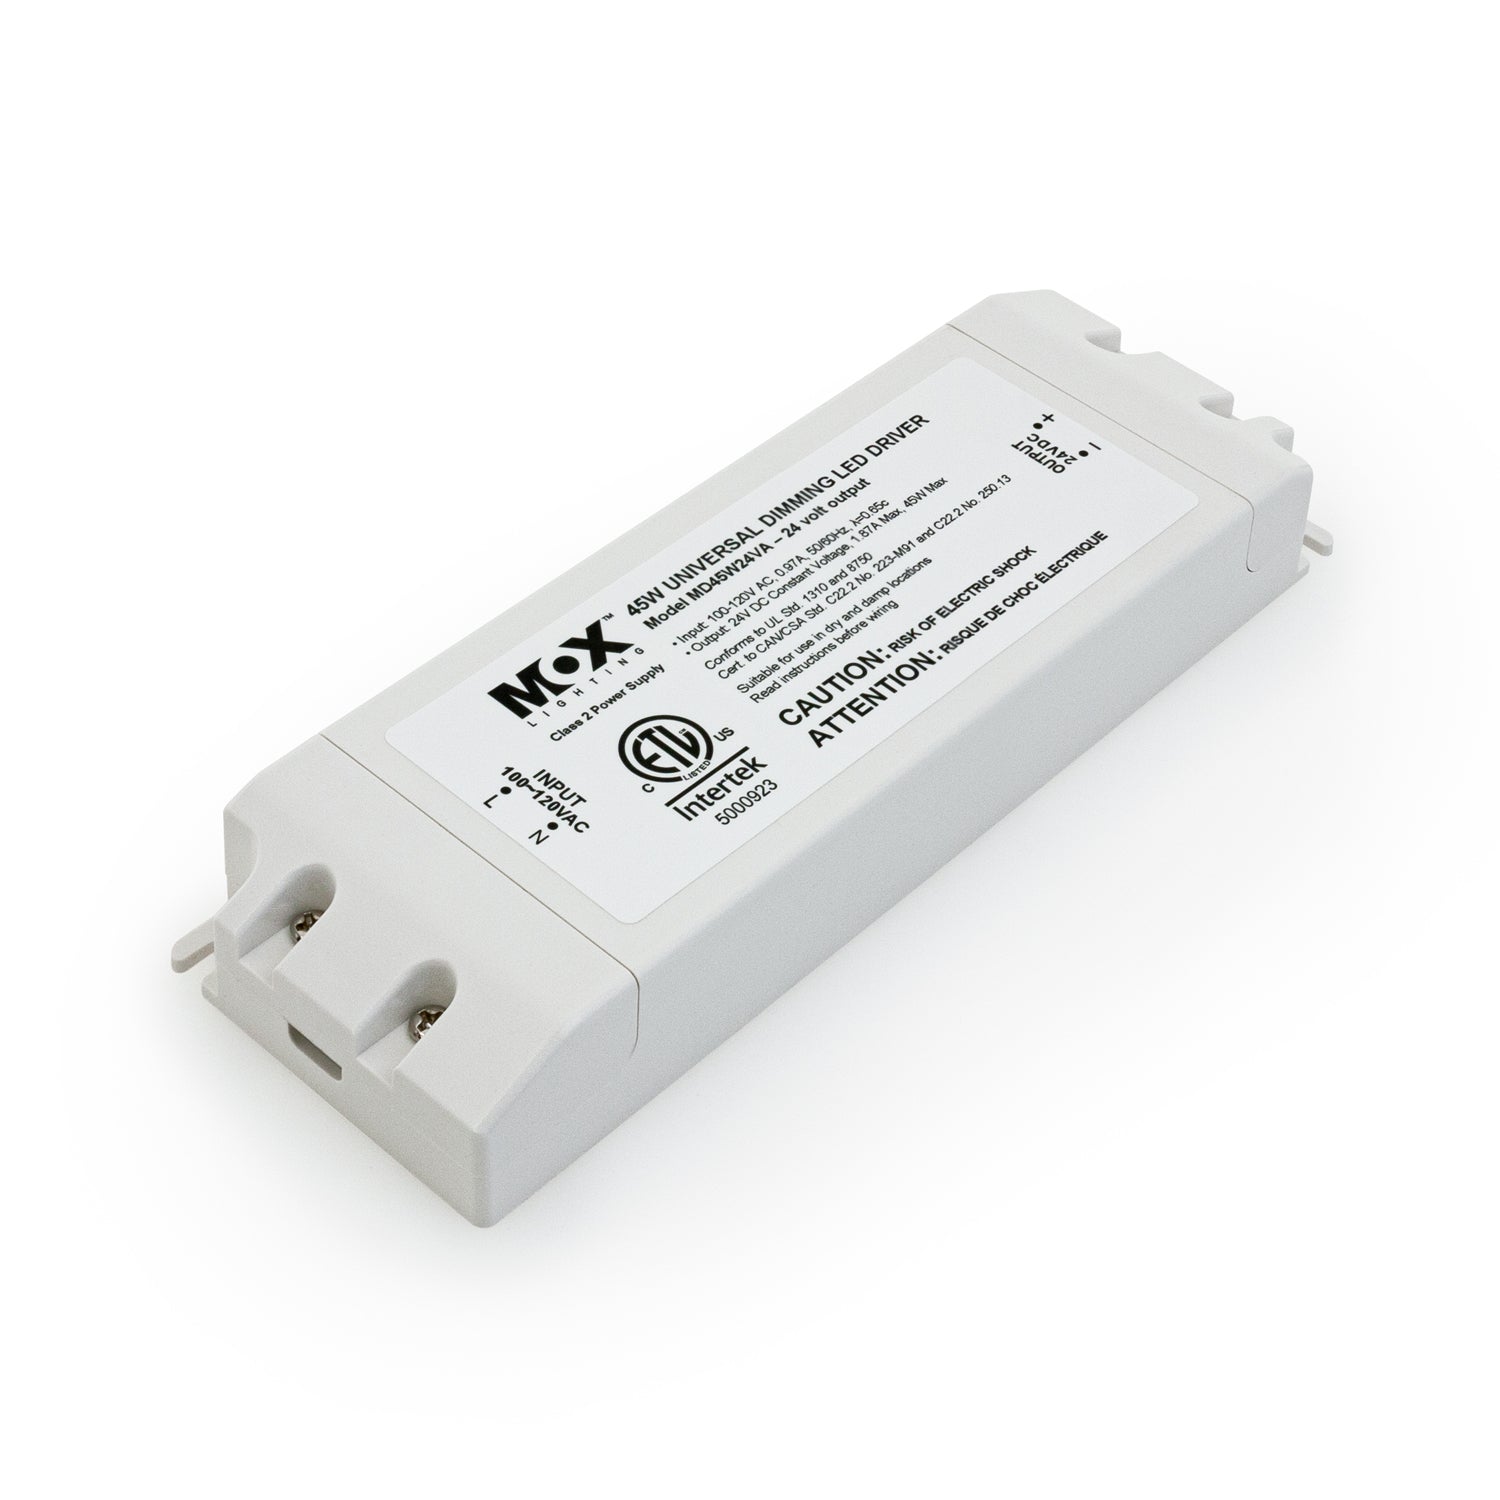 wond kennis paradijs MD24W45VA Dimmable LED Driver,